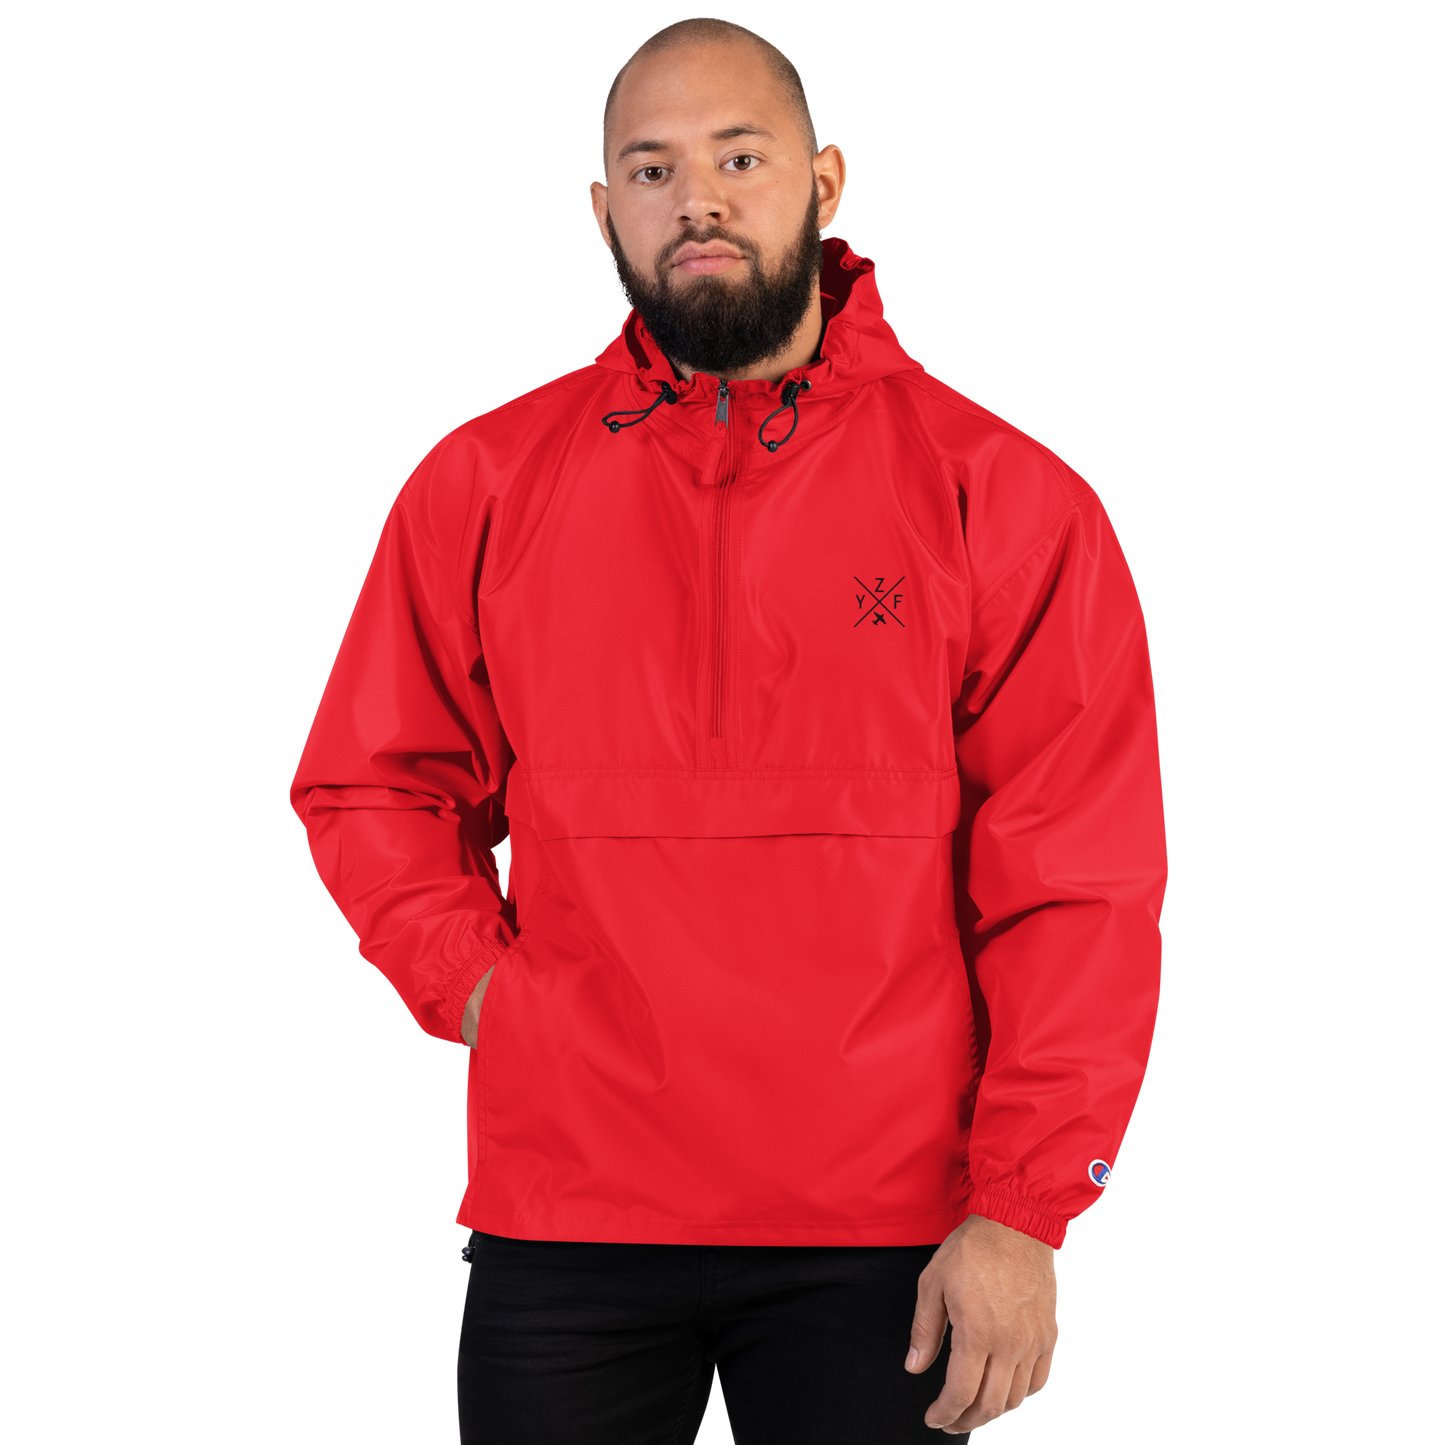 Crossed-X Packable Jacket • YZF Yellowknife • YHM Designs - Image 11